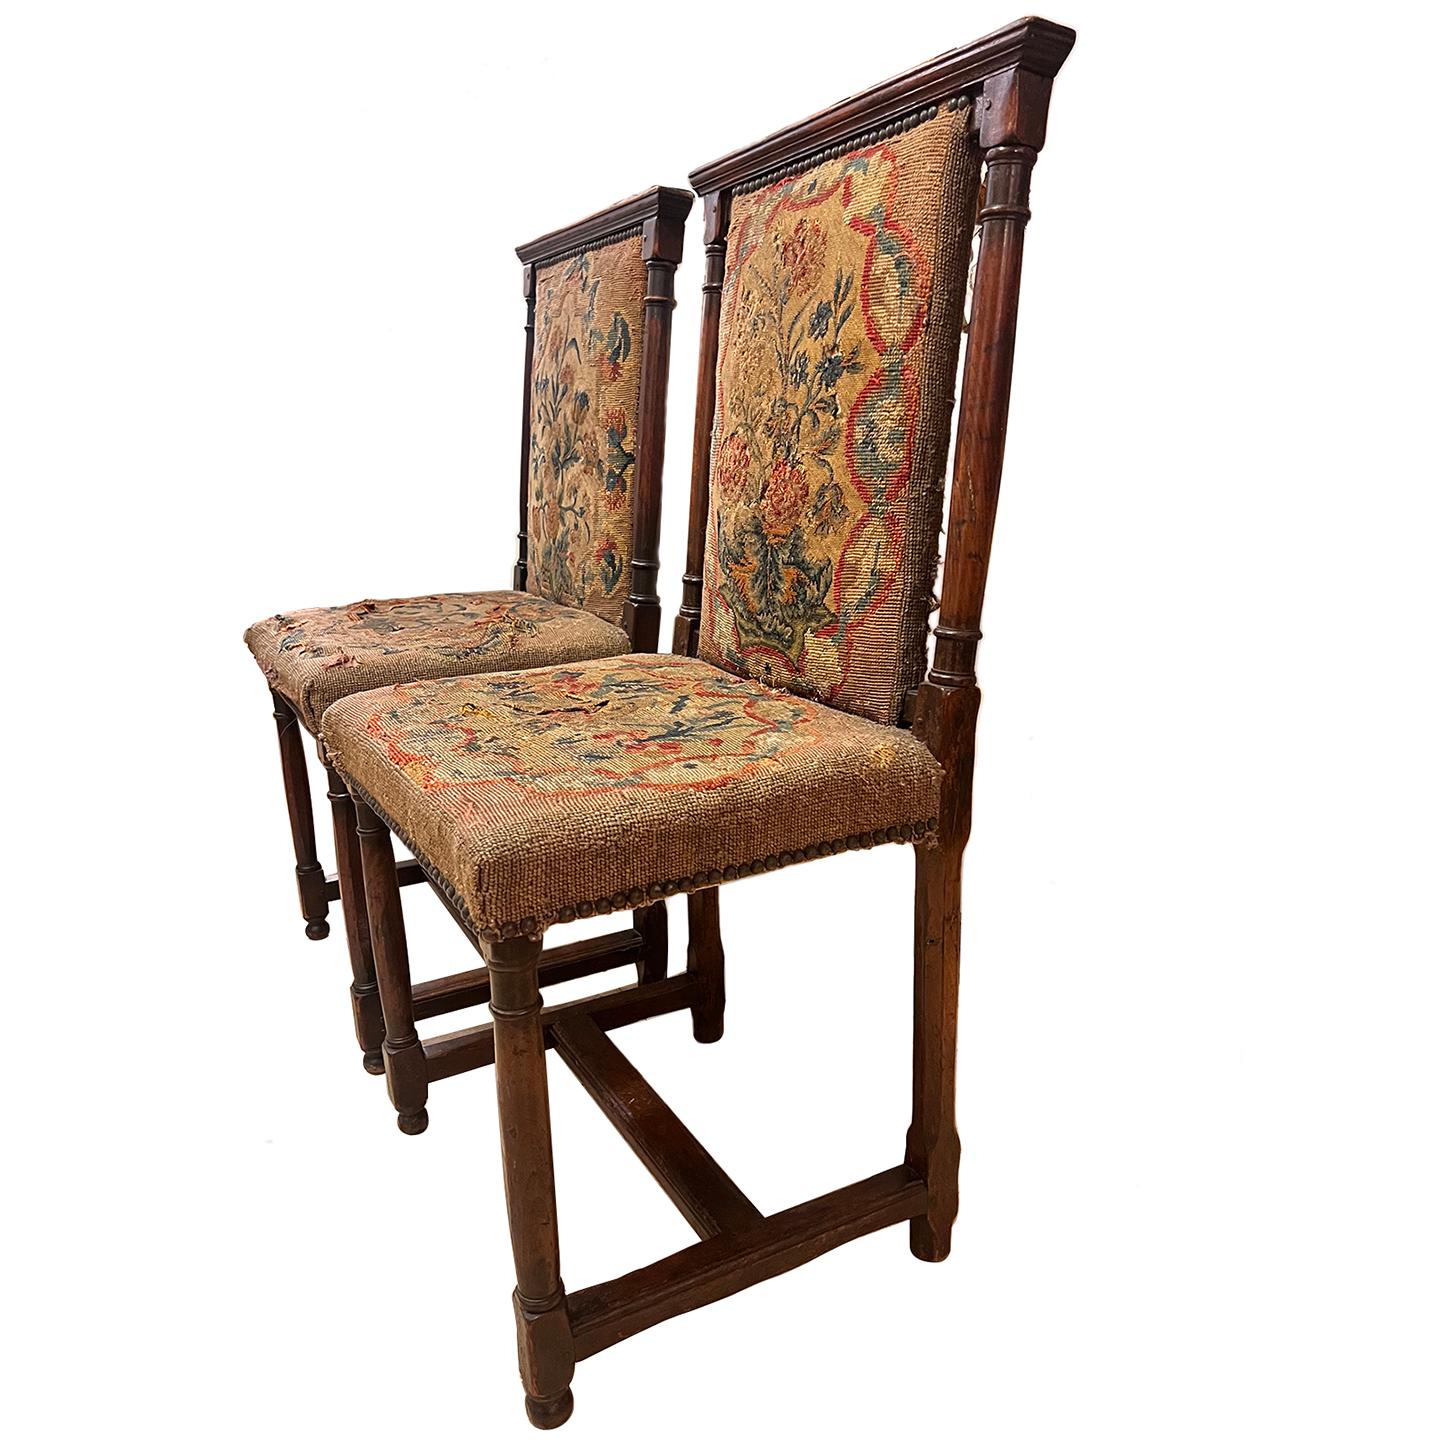 Pair of 19th Century English oak chairs with original needlepoint upholstery.

Measurements:
Height: 39